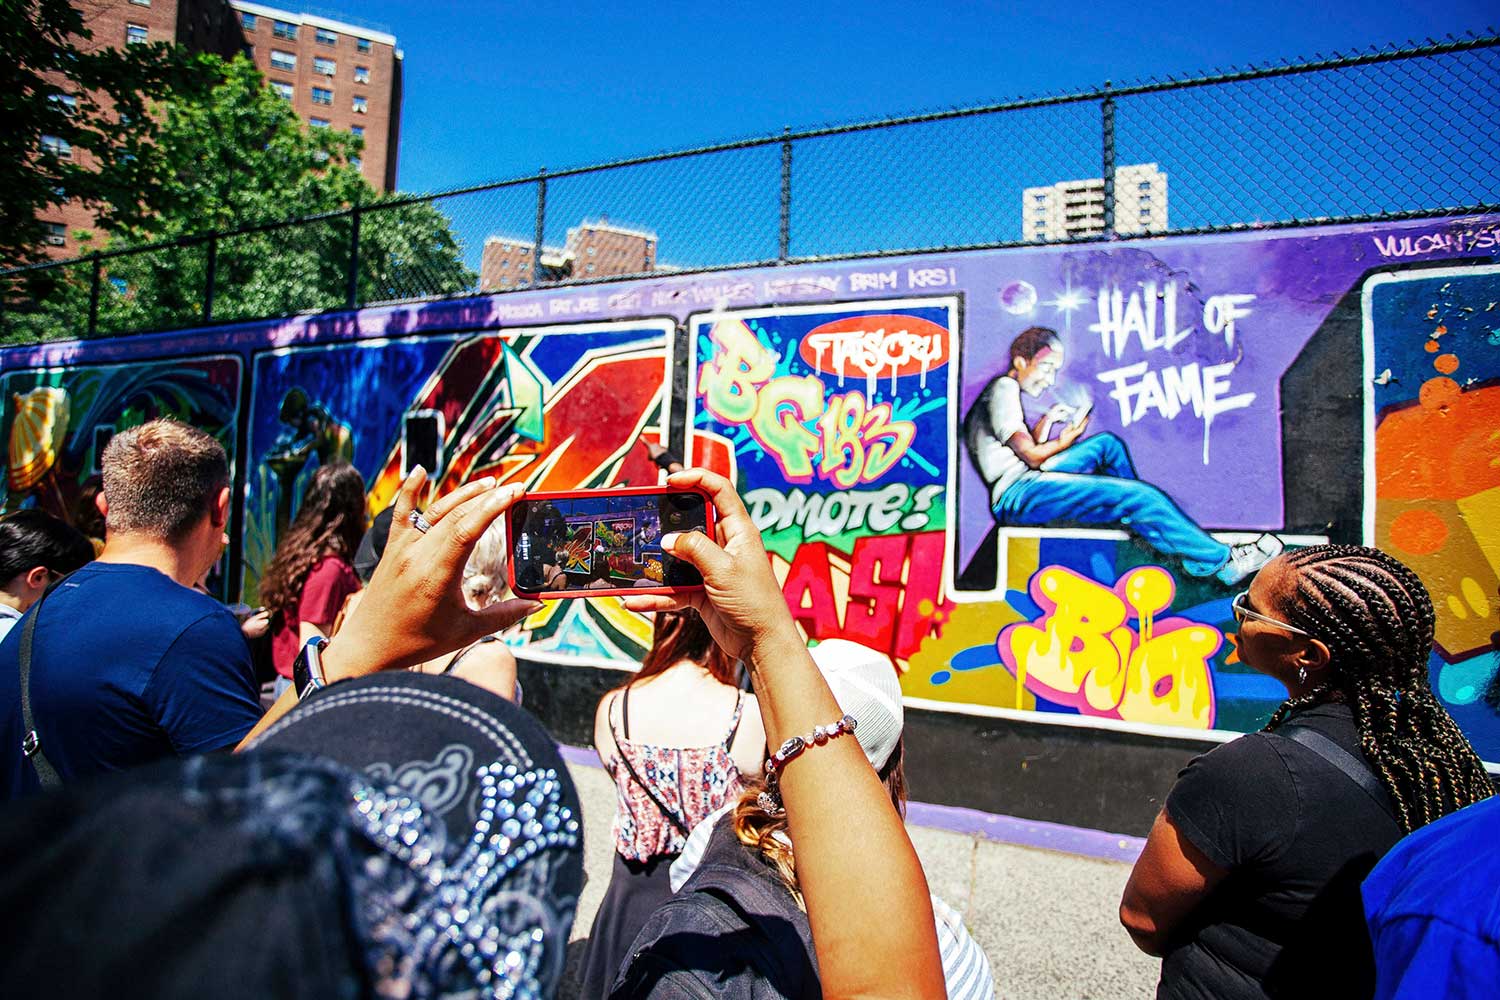 People using a cell phone to capture an image of a graffiti wall